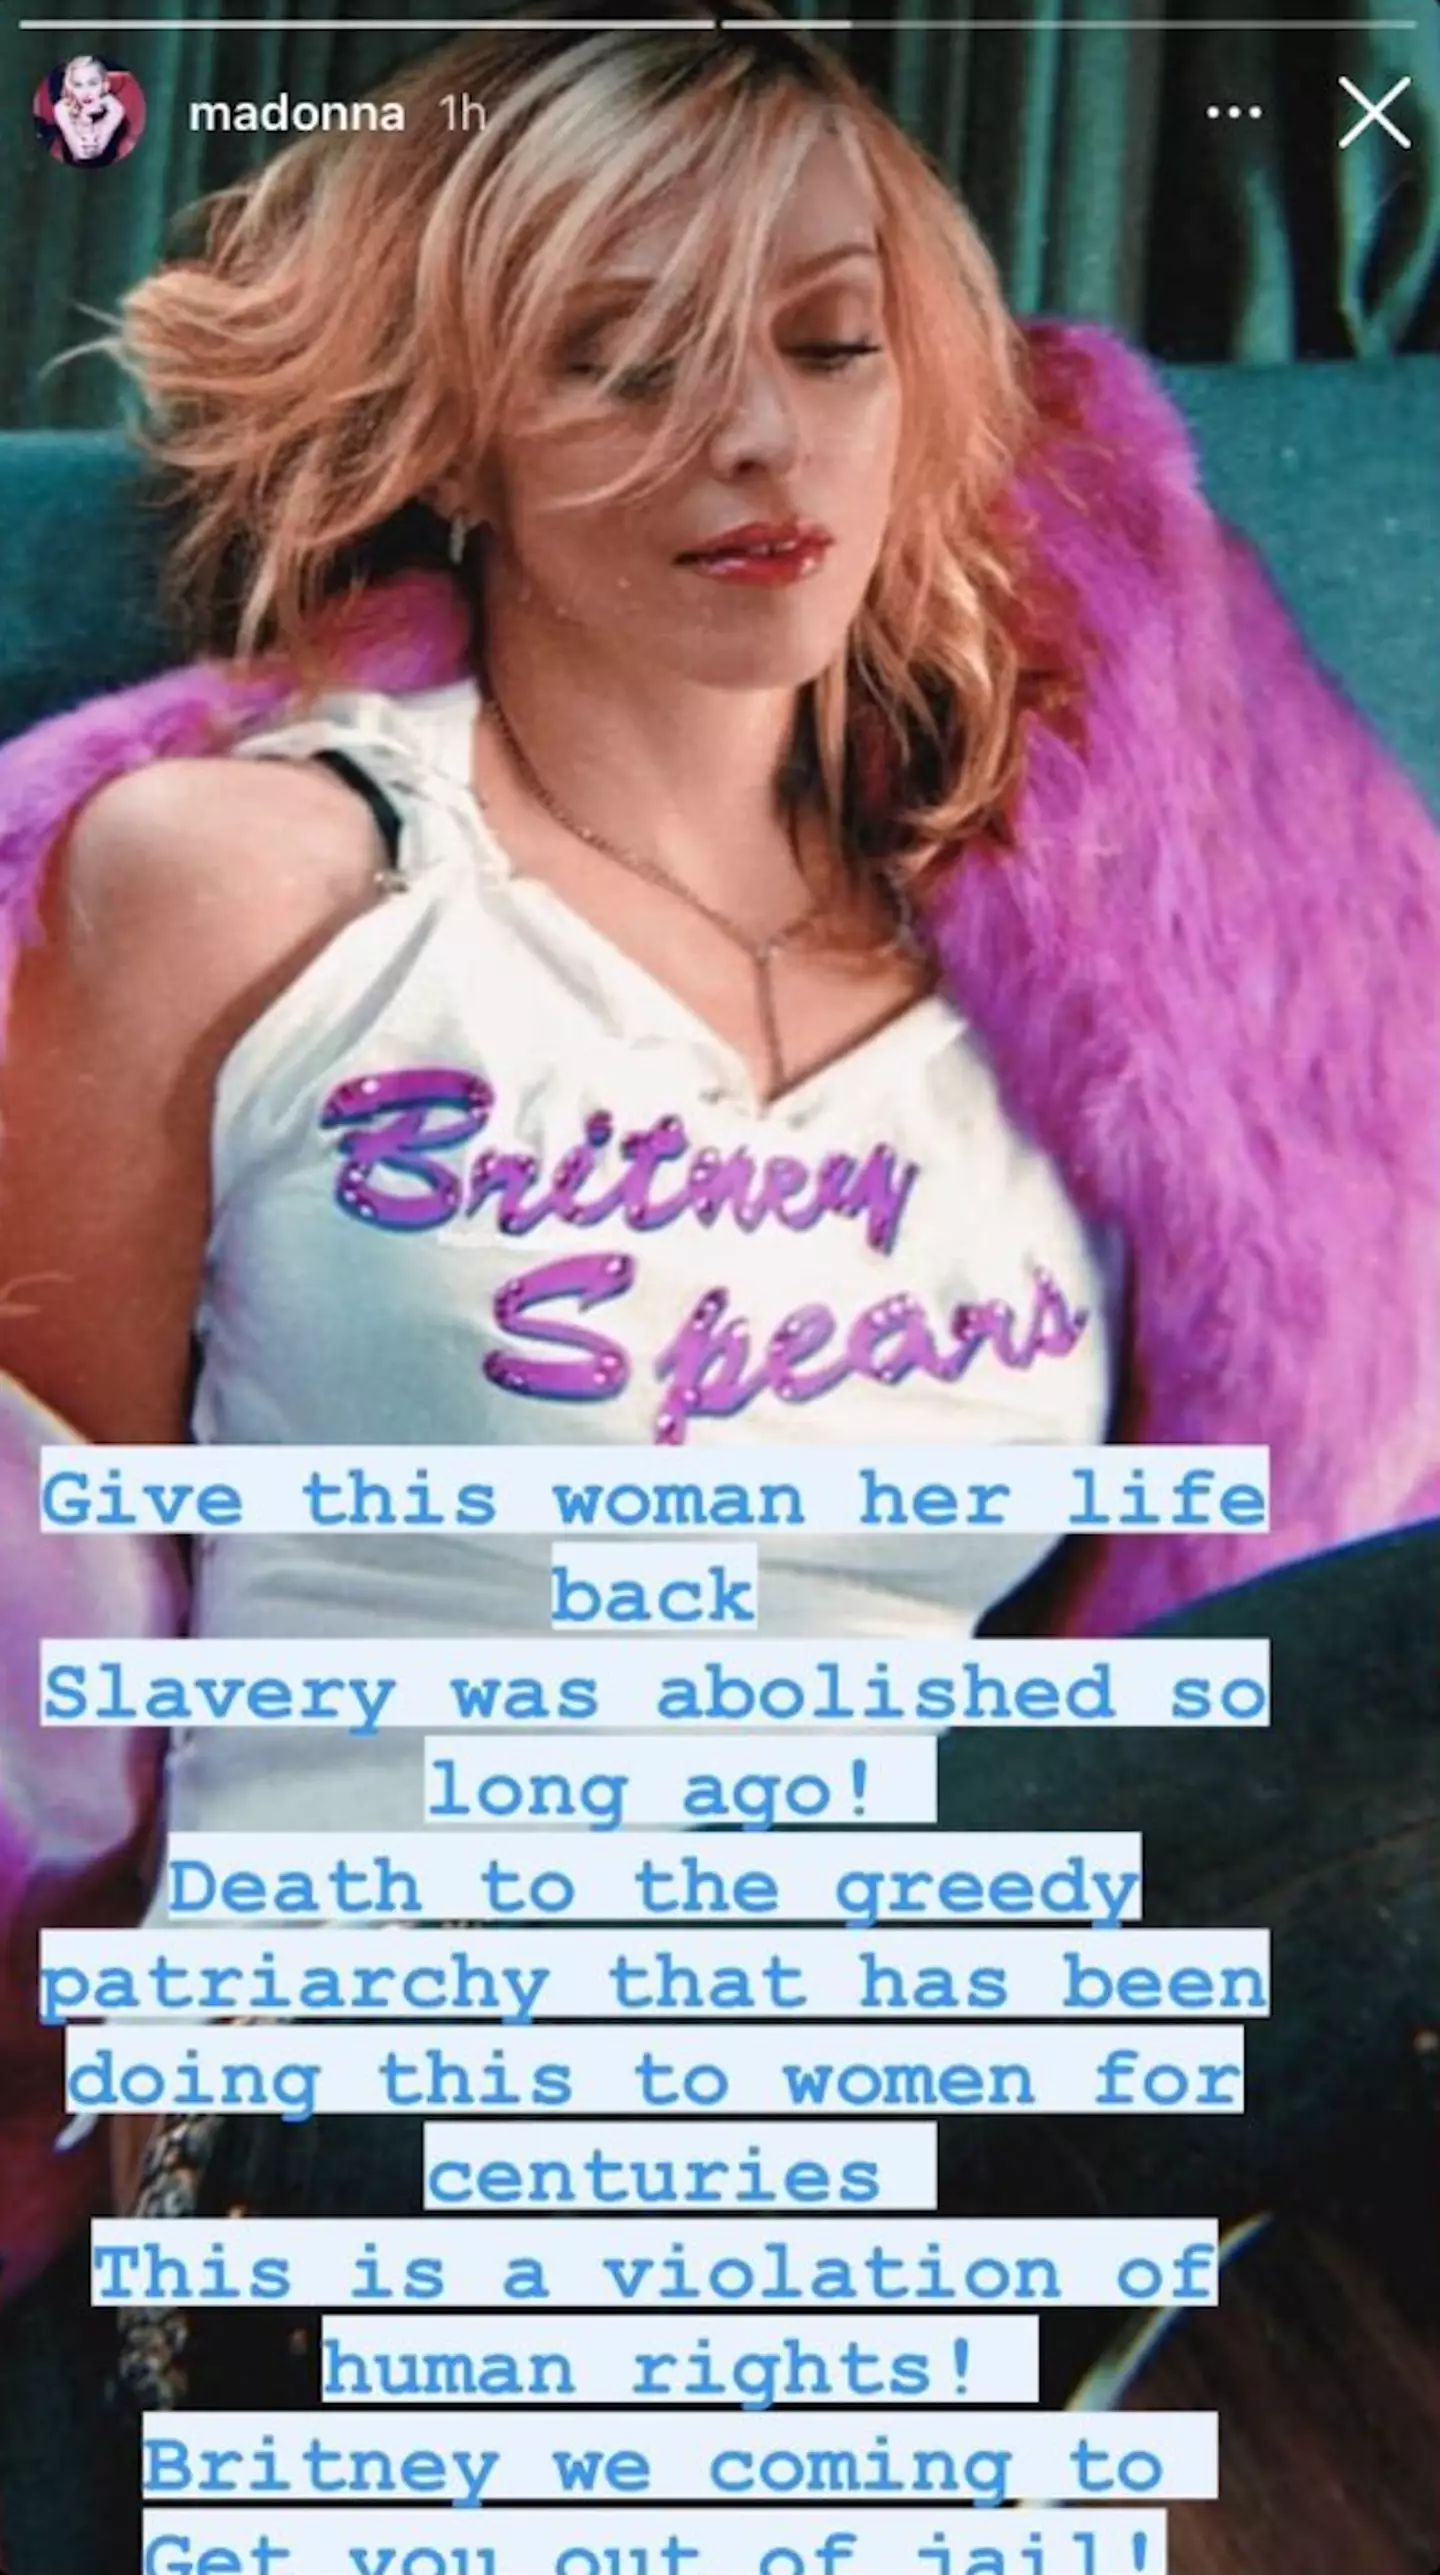 Madonna supported #FreeBritney.